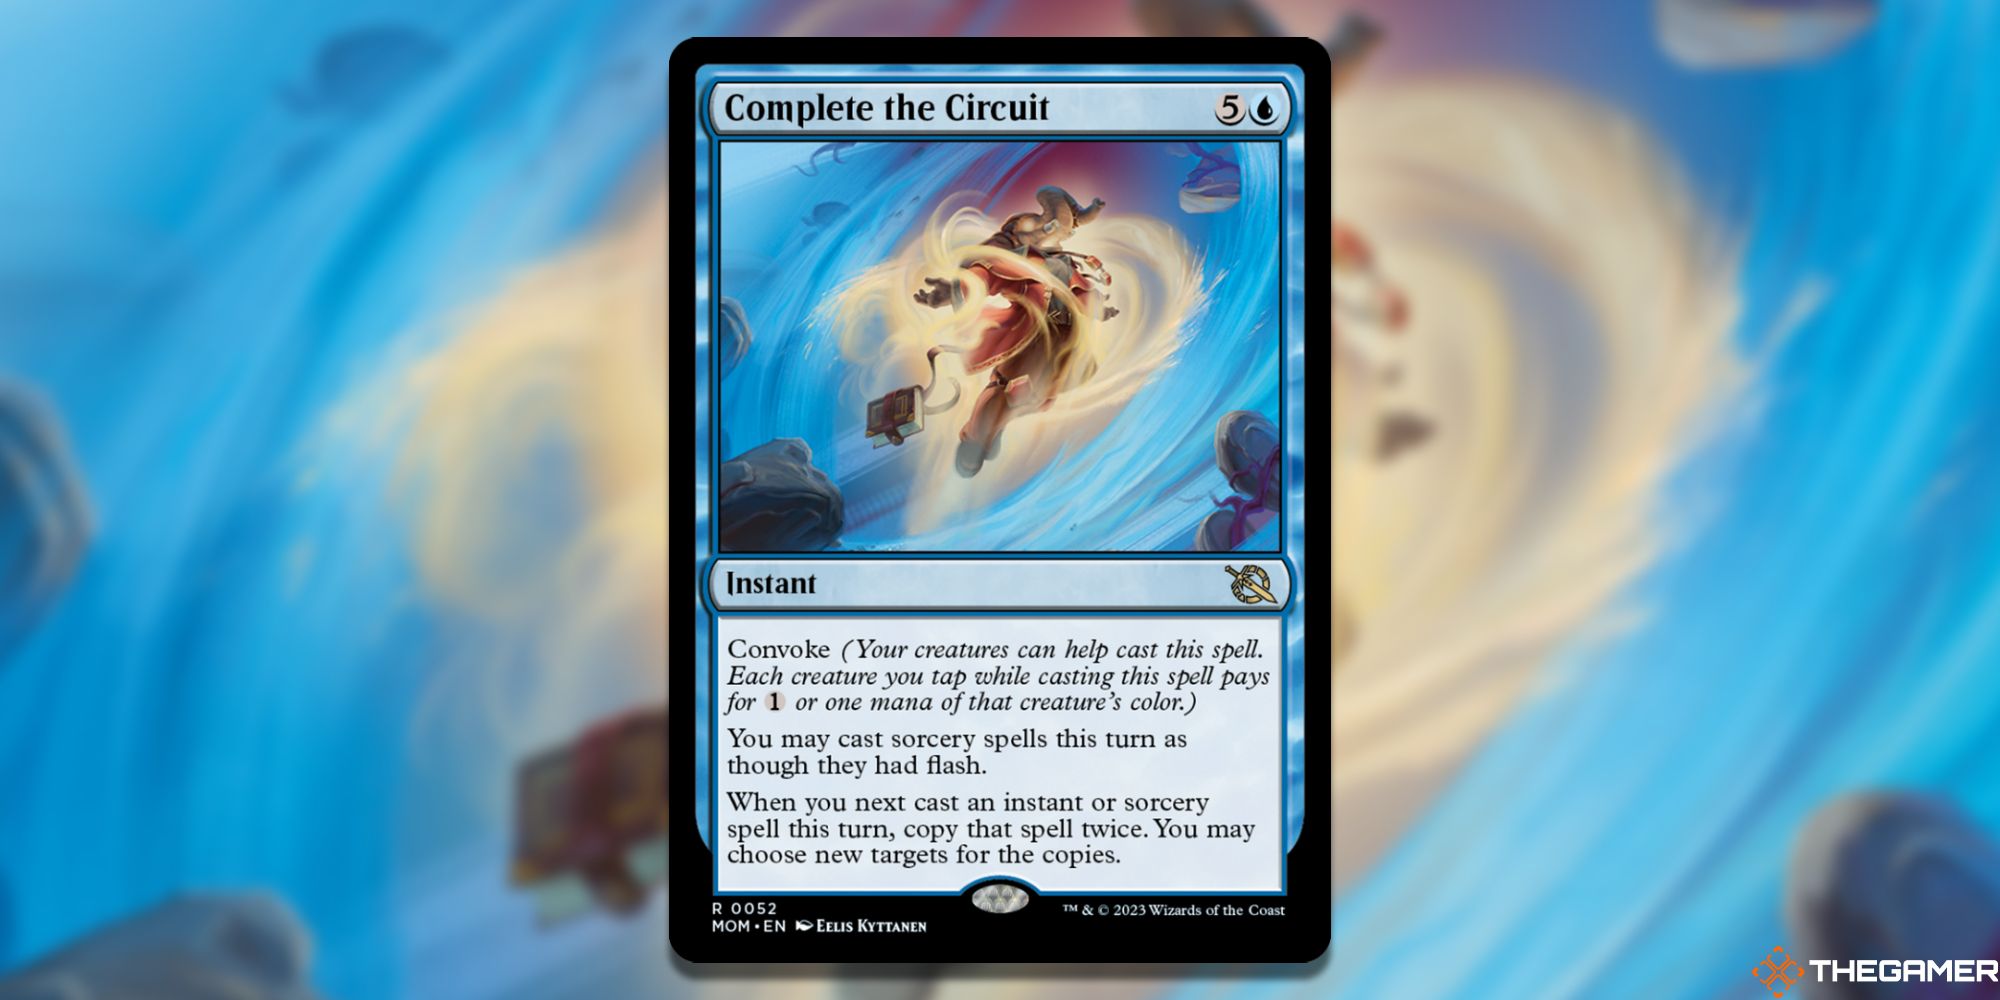 Complete the Circuit card image from Magic: The Gathering, with artwork by Eelis Kyttanen